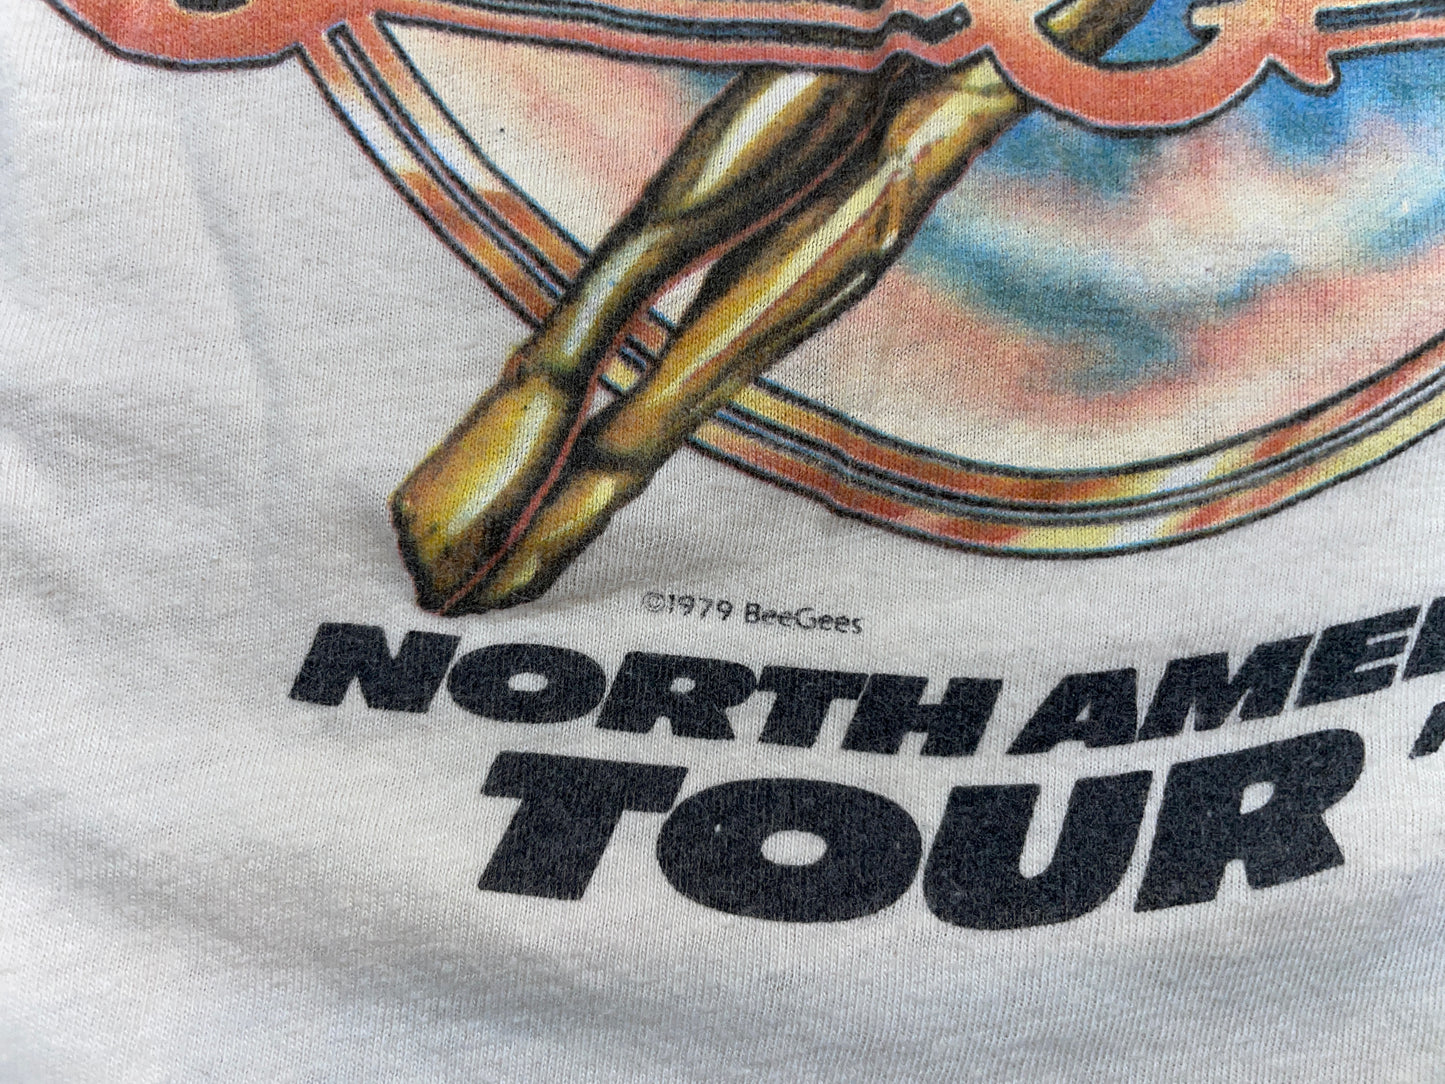 Vintage 1979 Bee Gees North American Tour T-Shirt